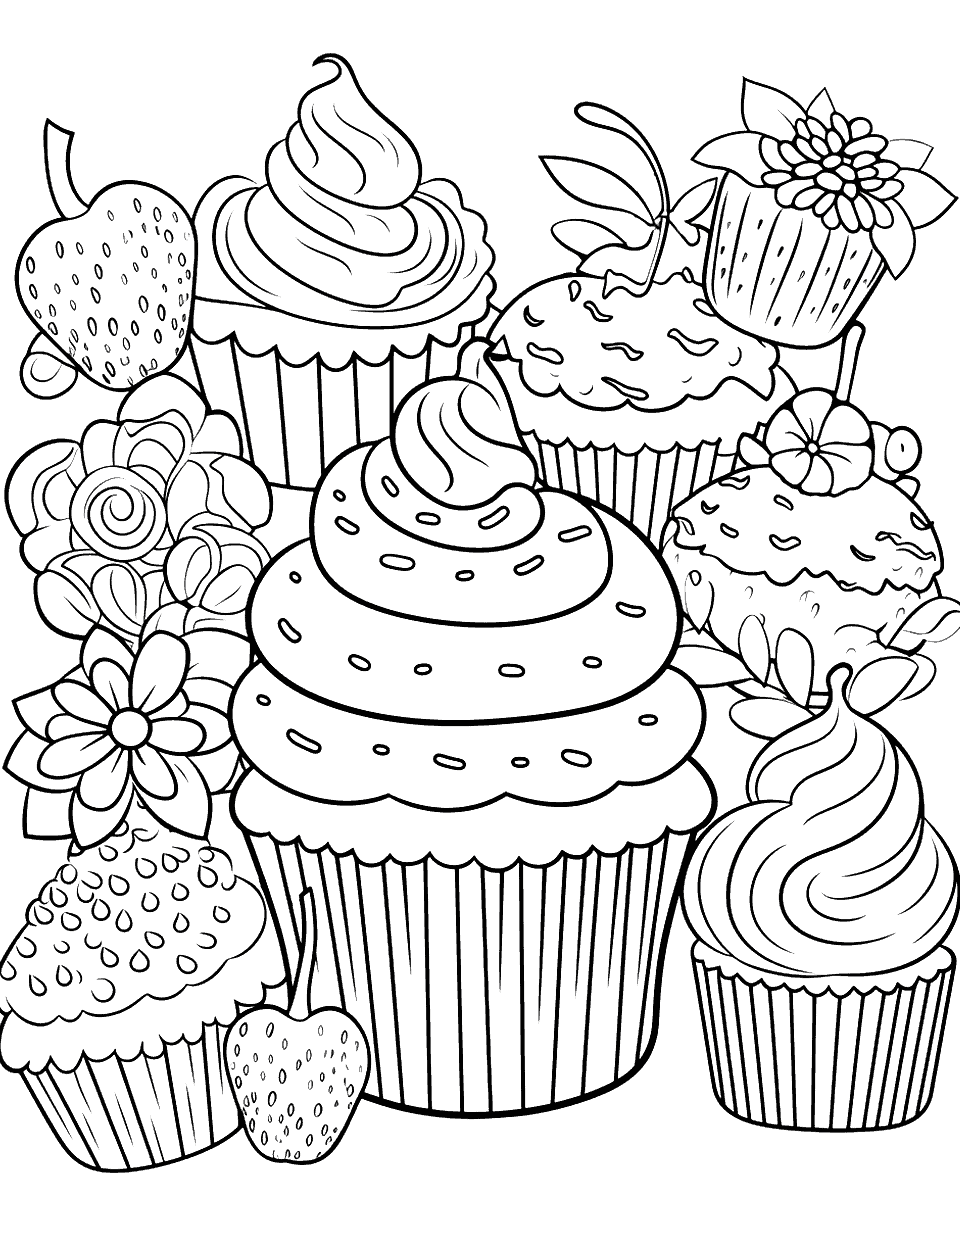 Cupcake Wonderland Coloring Page - Multiple cupcakes arranged in a whimsical garden setting.